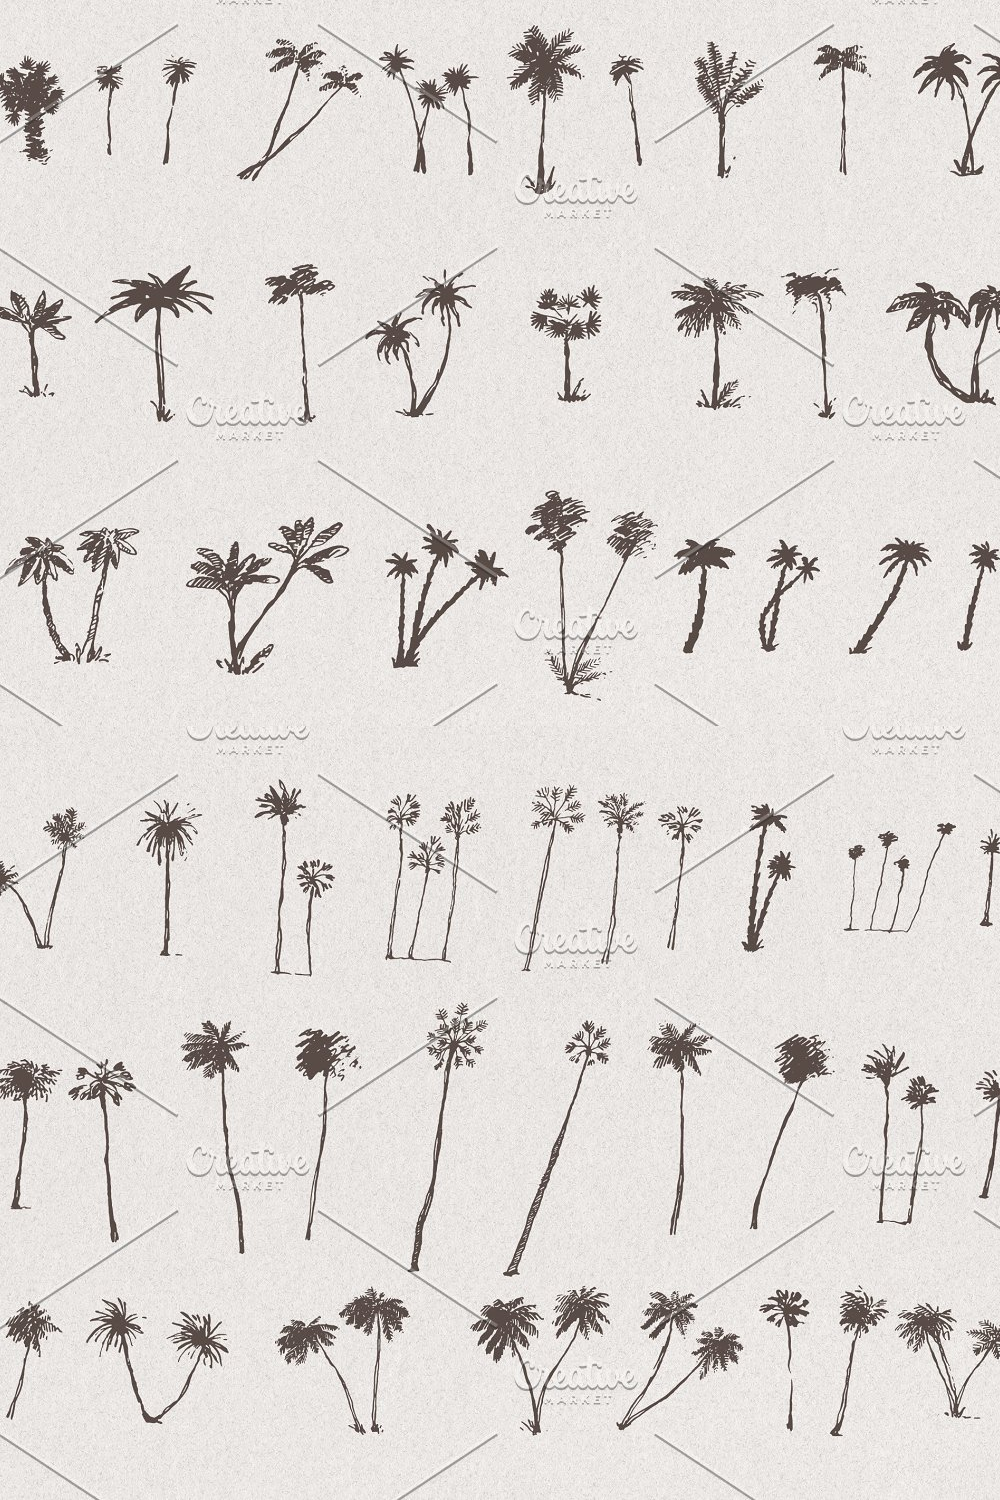 Illustrations silhouettes of palm trees pinterest.